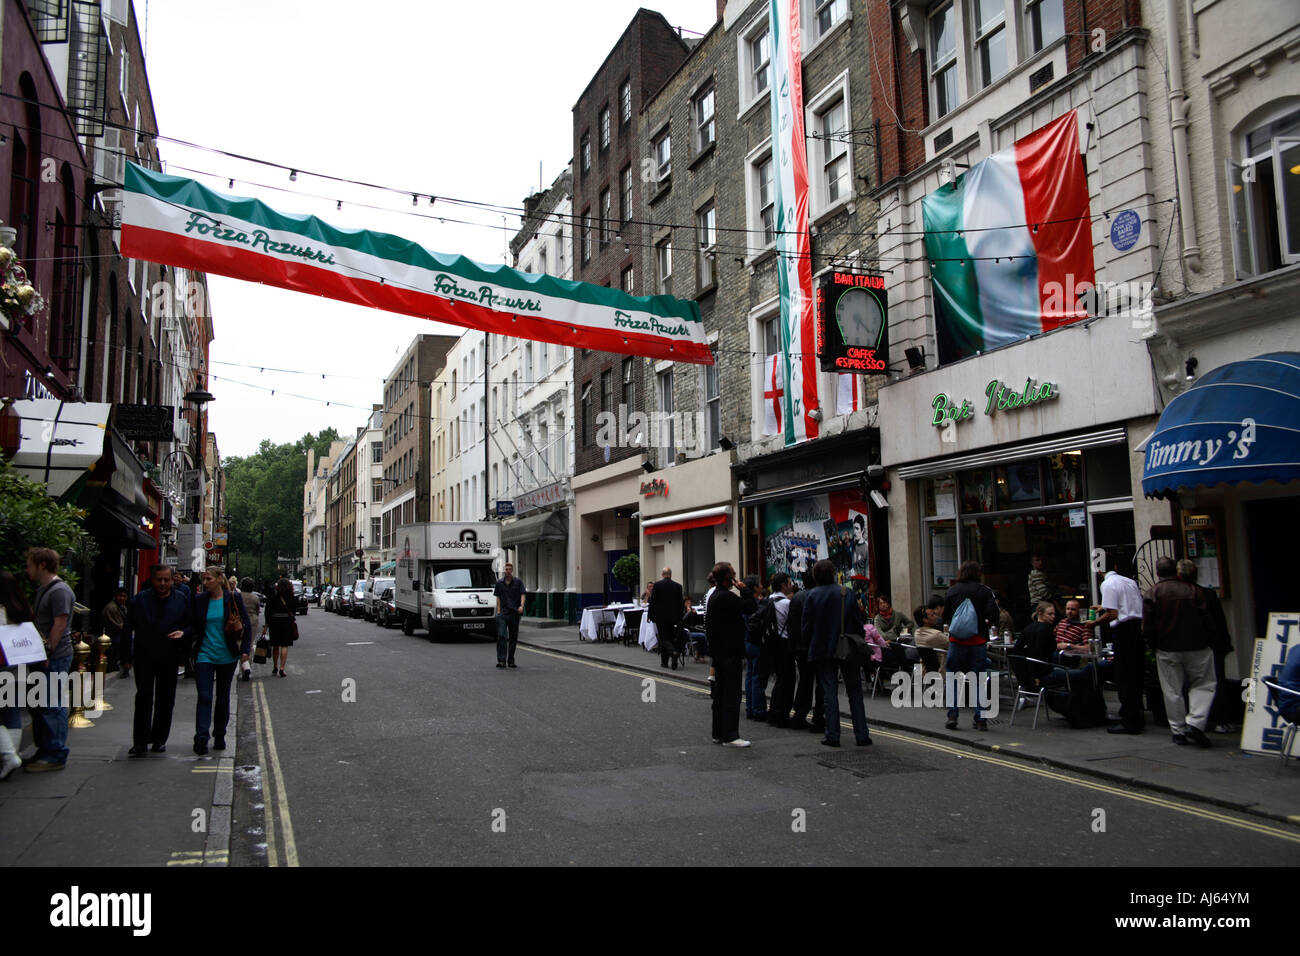 Football flags hanging outside Bar Italia in Soho, London, World Cup Finals, 2006 Stock Photo